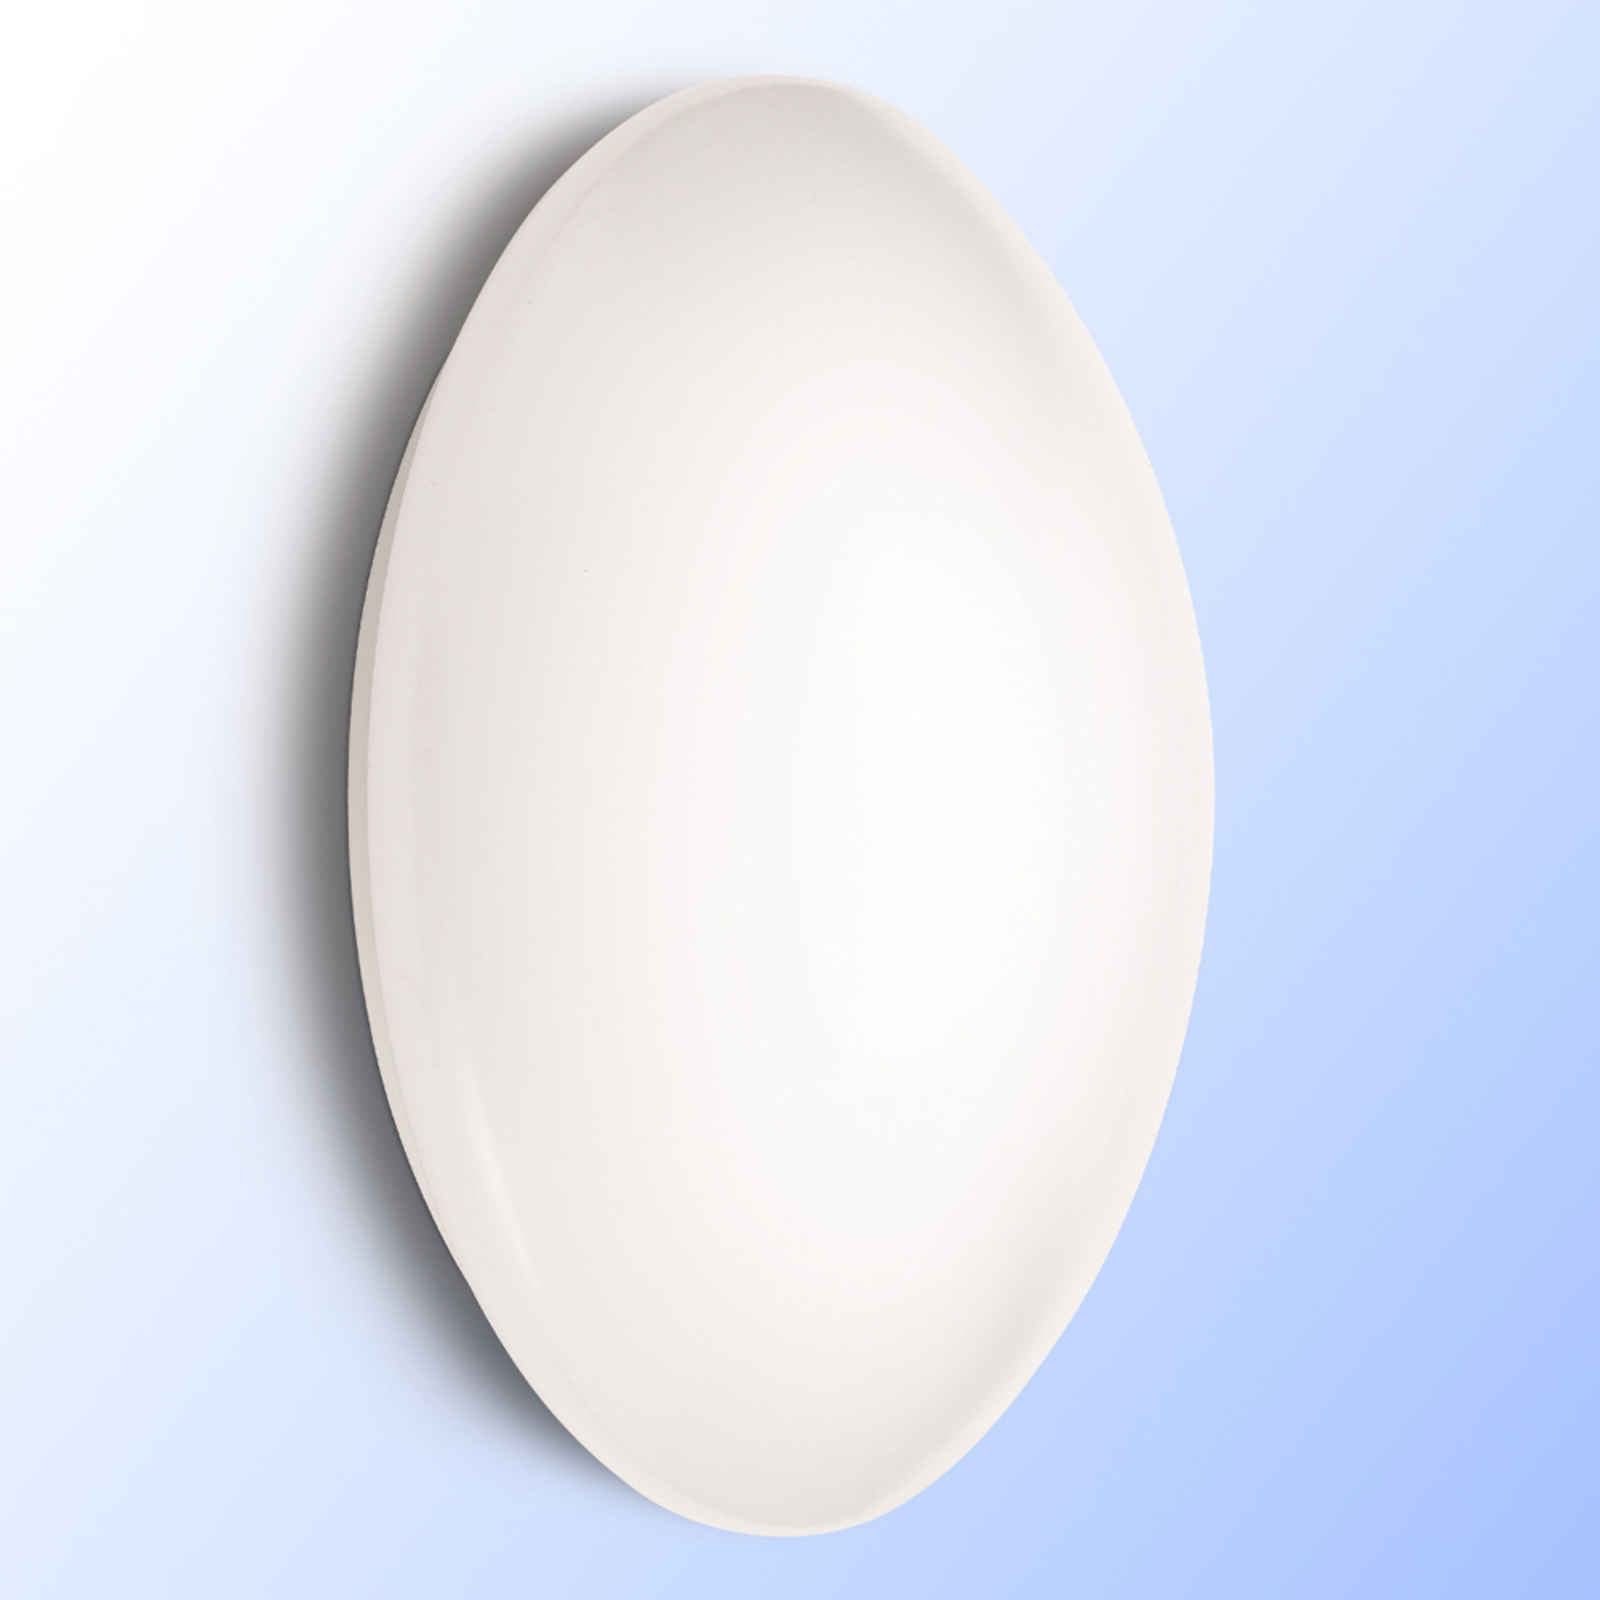 Philips Suede - round LED wall light, Ø 28 cm